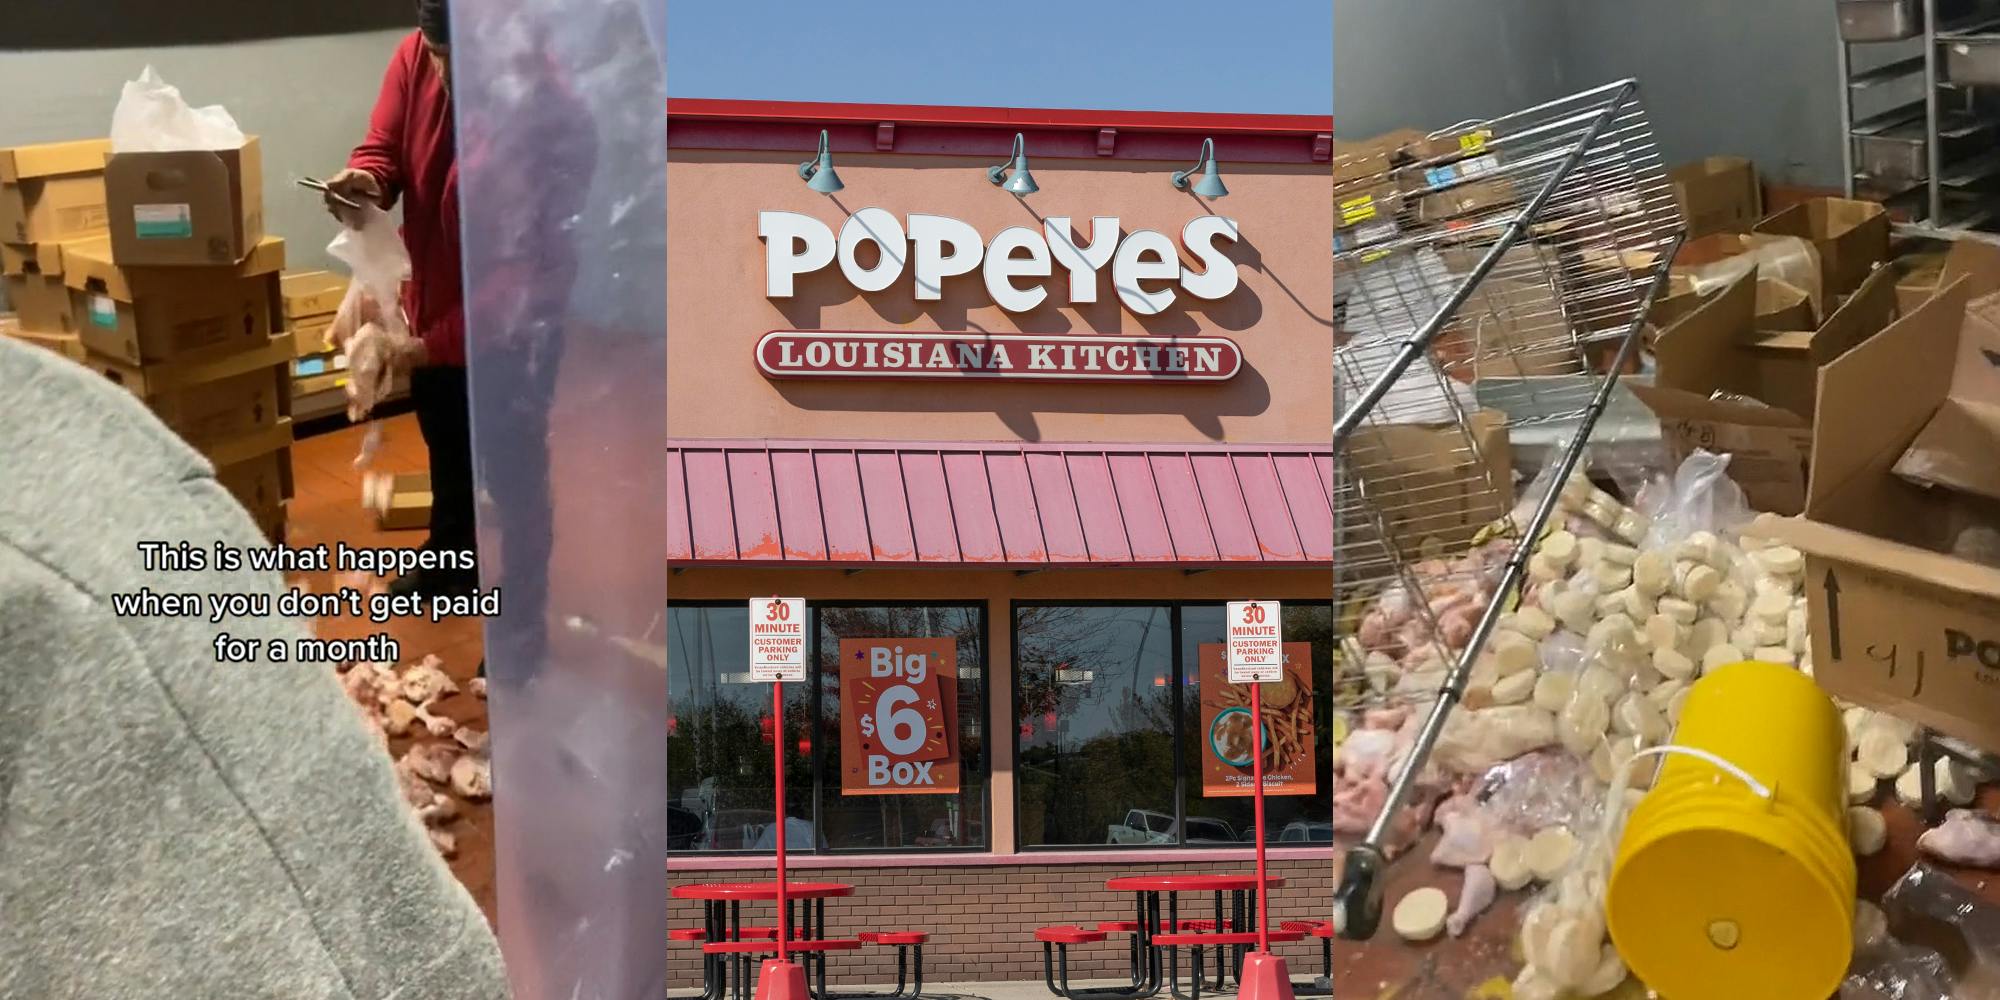 Popeyes worker trashing restaurant with caption "This is what happens when you don't get paid for a month" (l) Popeyes restaurant with sign (c) Popeyes interior trashed with shelves tipped over, buns on the ground, and boxes thrown everywhere (r)